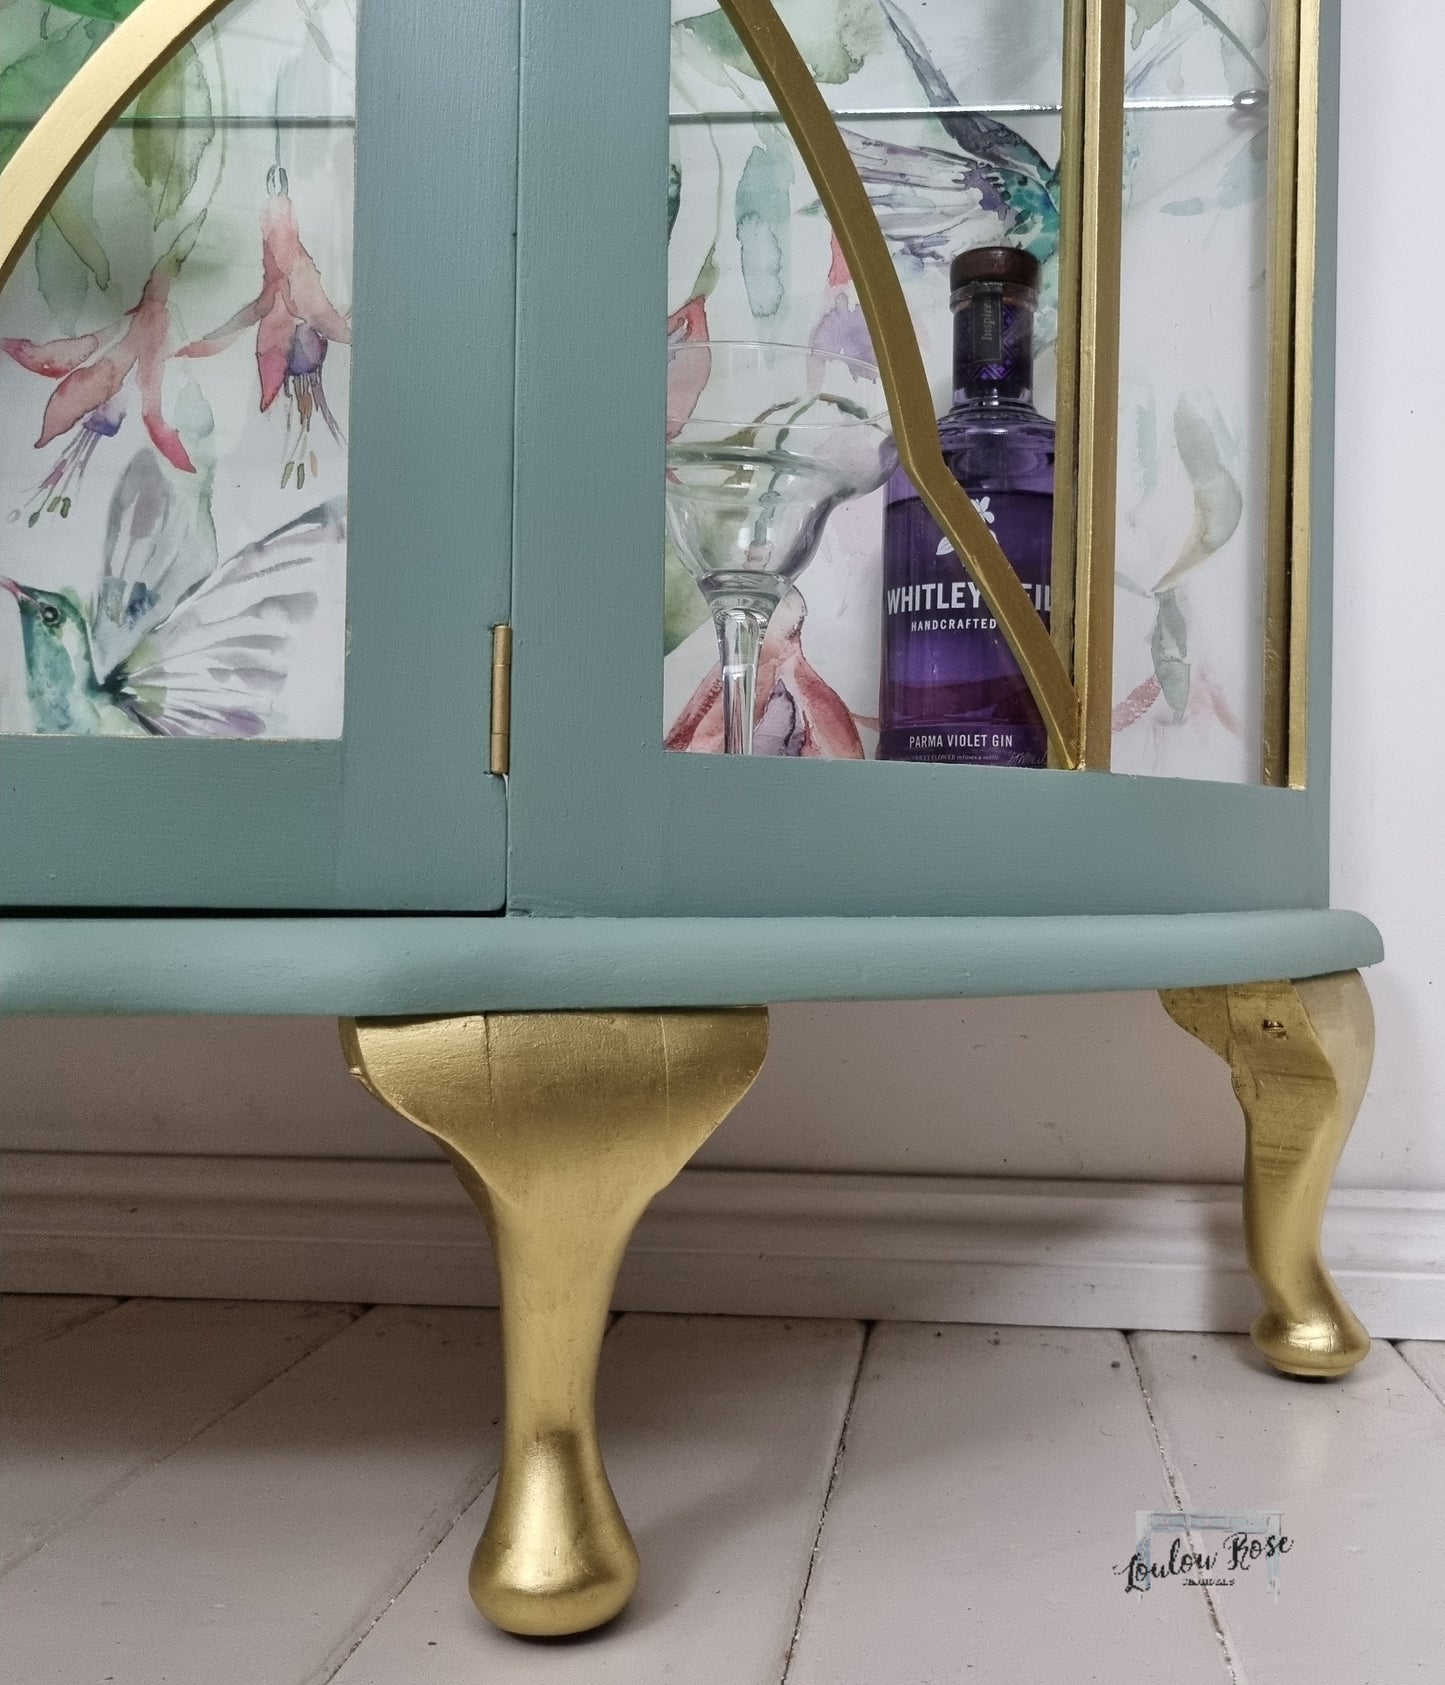 Drinks / Display Cabinet in Pale Blue Green and Gold